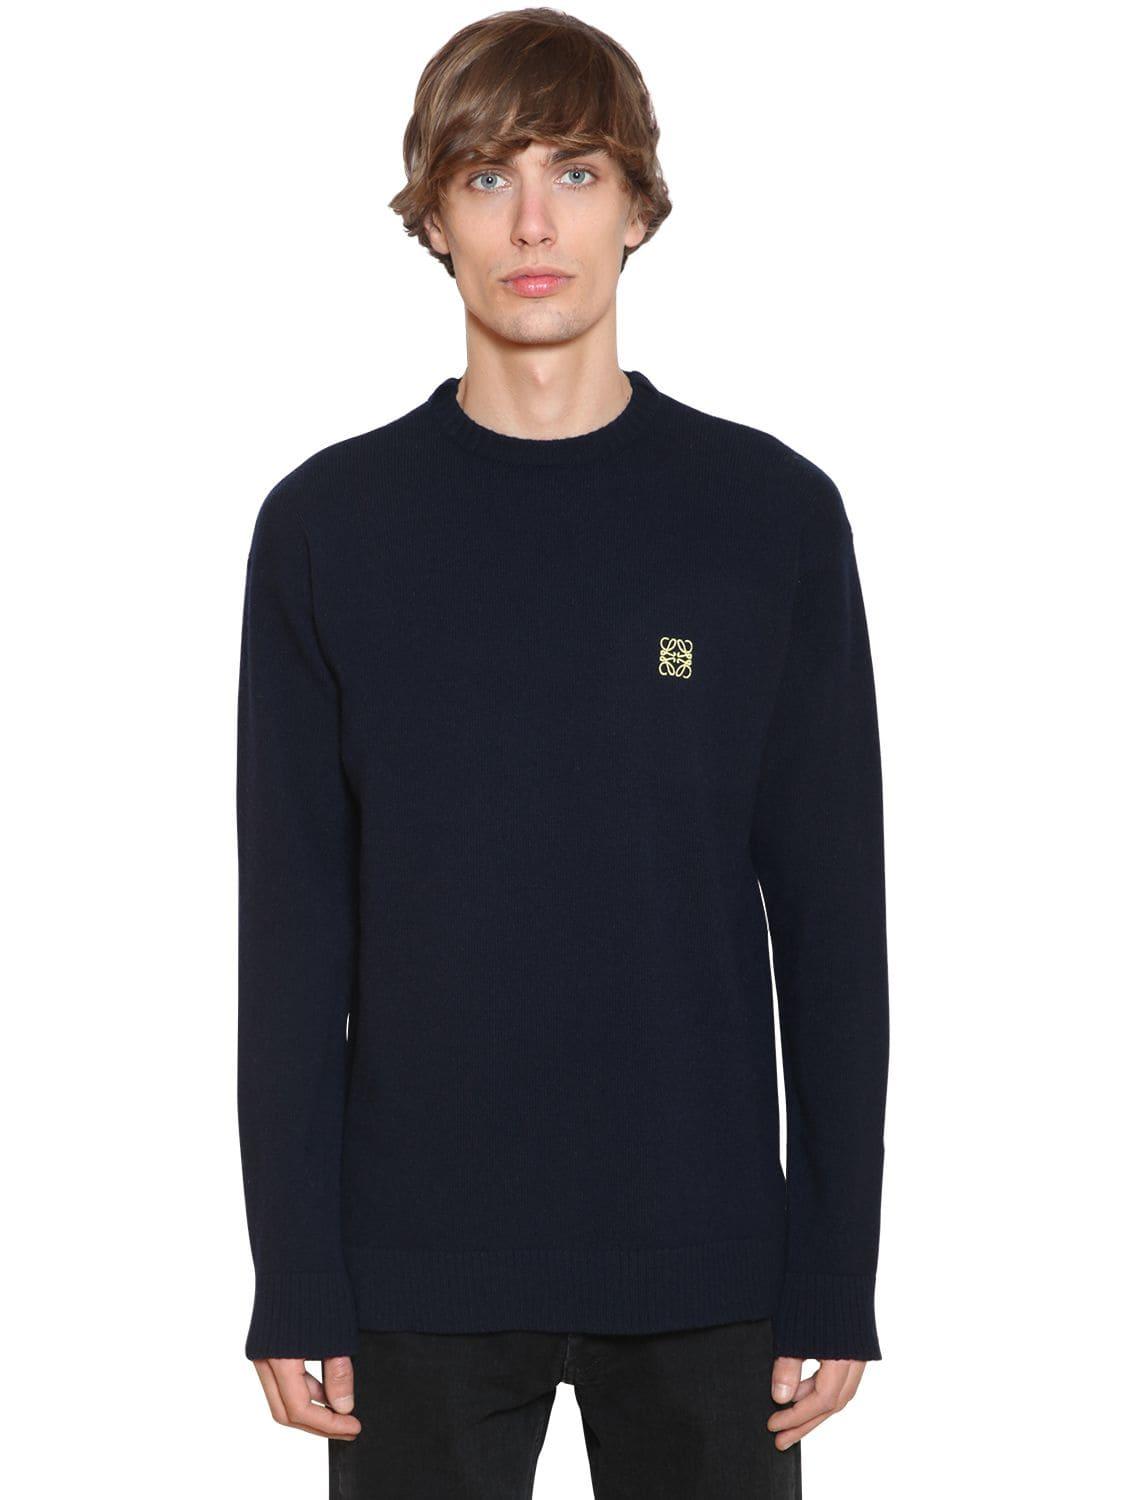 Loewe Embroidered Anagram Wool Knit Sweater in Blue for Men - Lyst